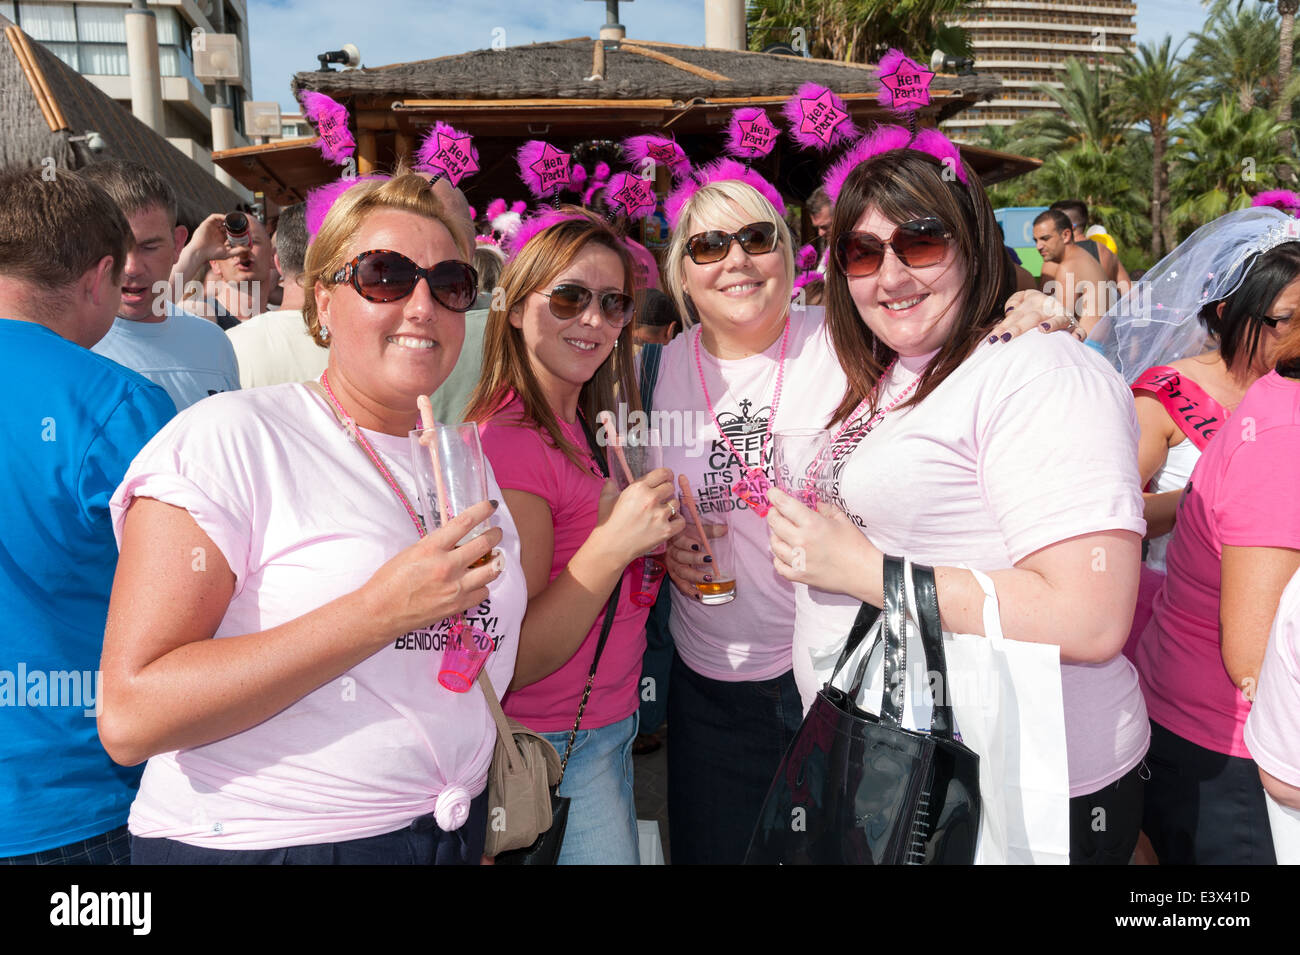 Group of British women on hen weekend drinking at bar on the waterfront, Benidorm, Costa Blanca, Spain Stock Photo